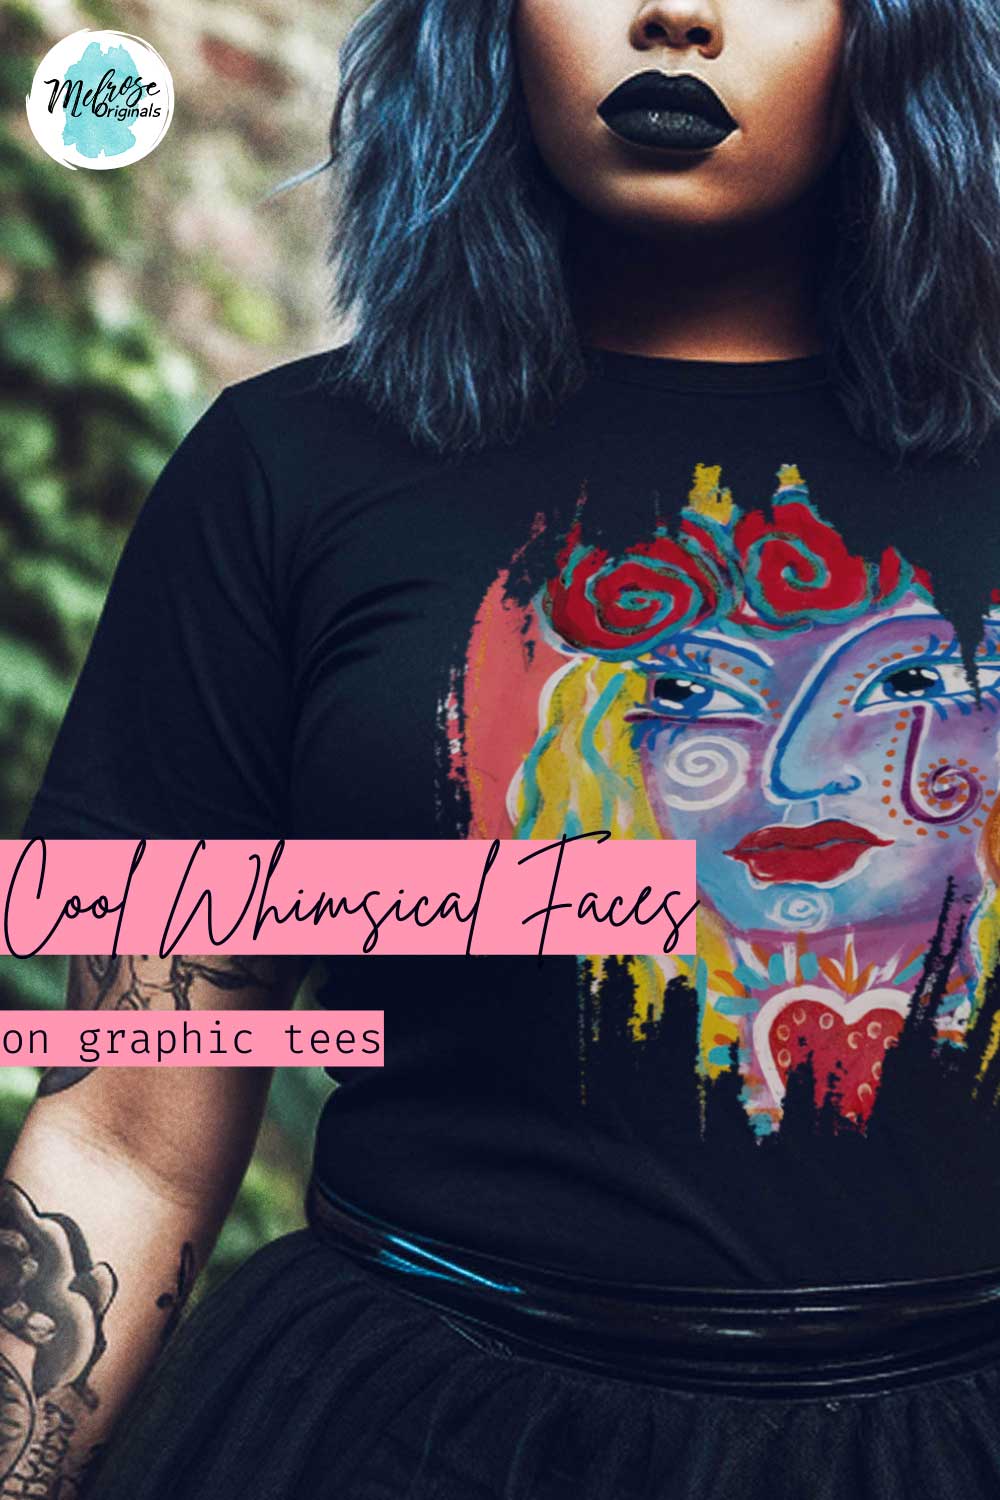 goth girl wearing vibrant art on graphic tee